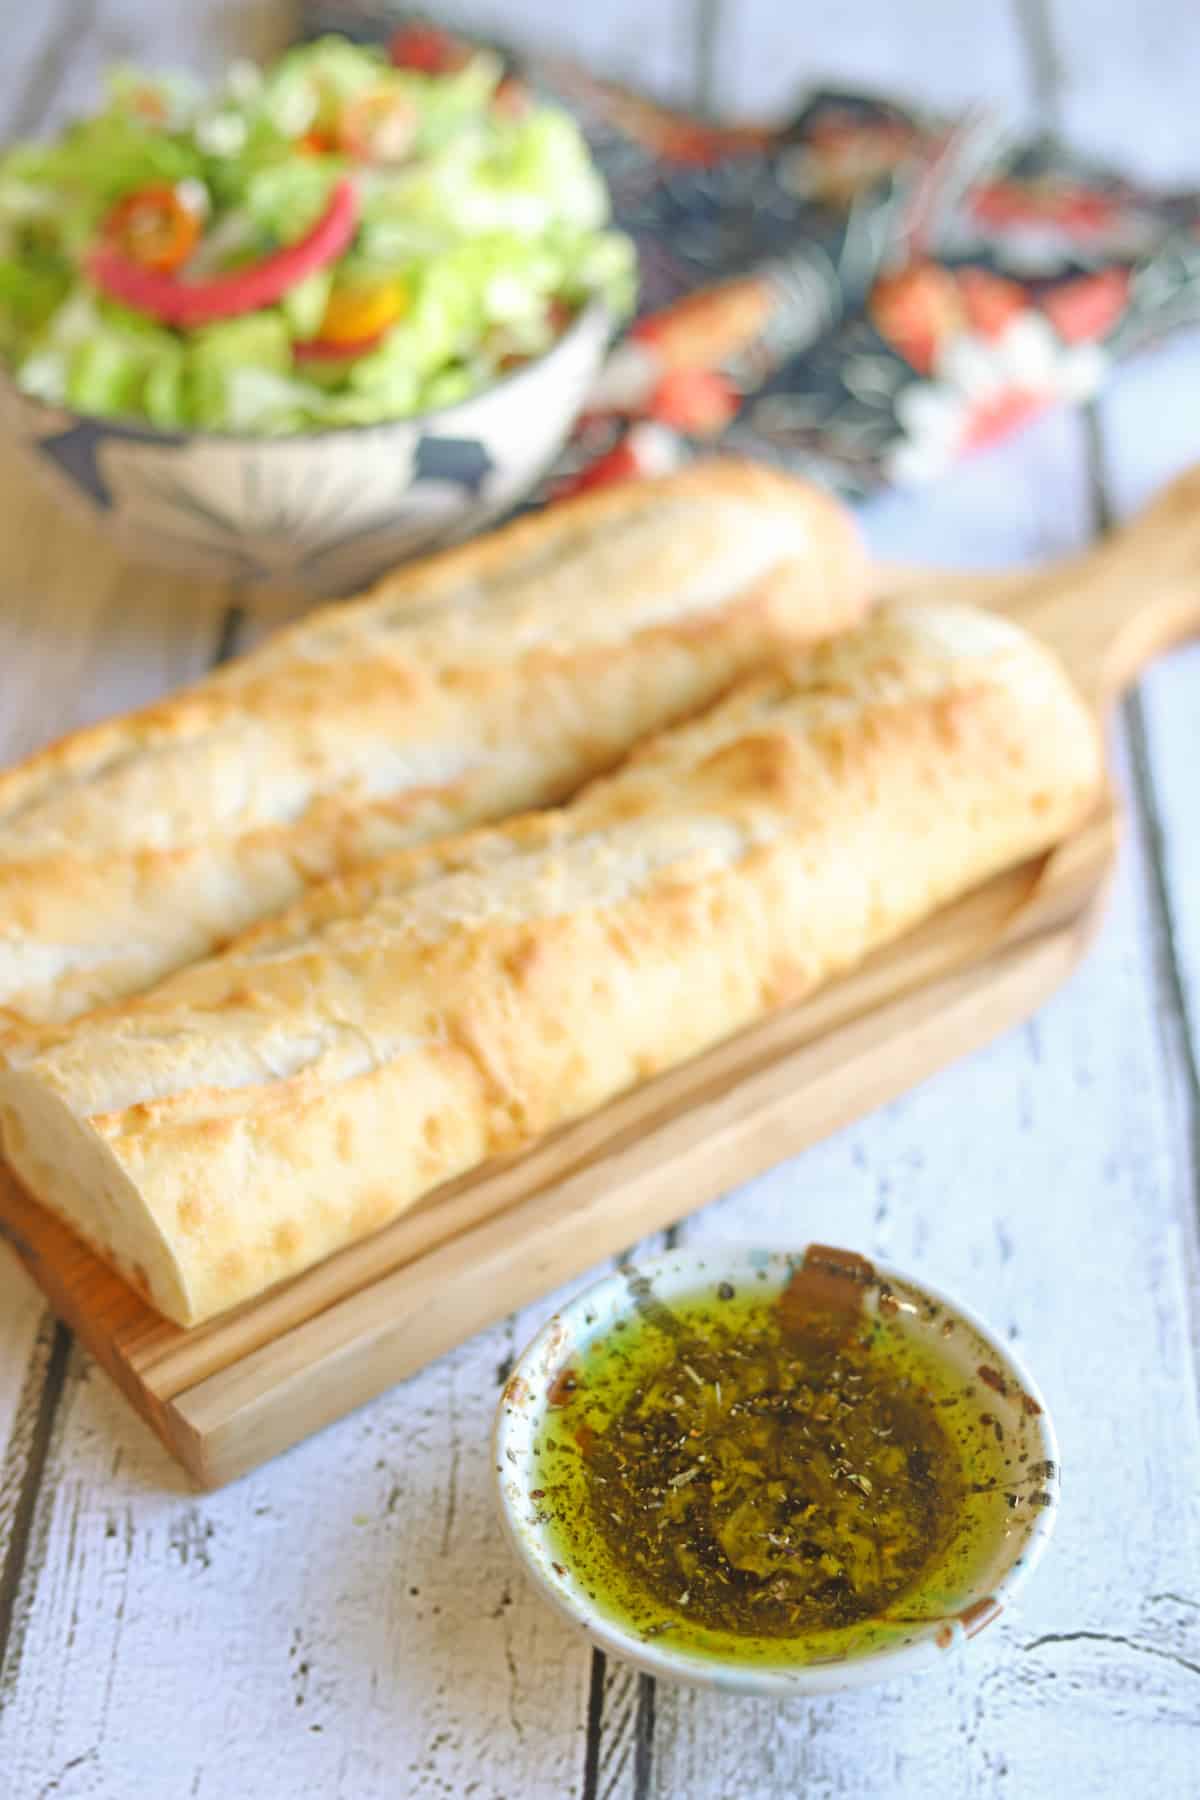 Seasoned olive oil with vinegar on table by baguette and salad.